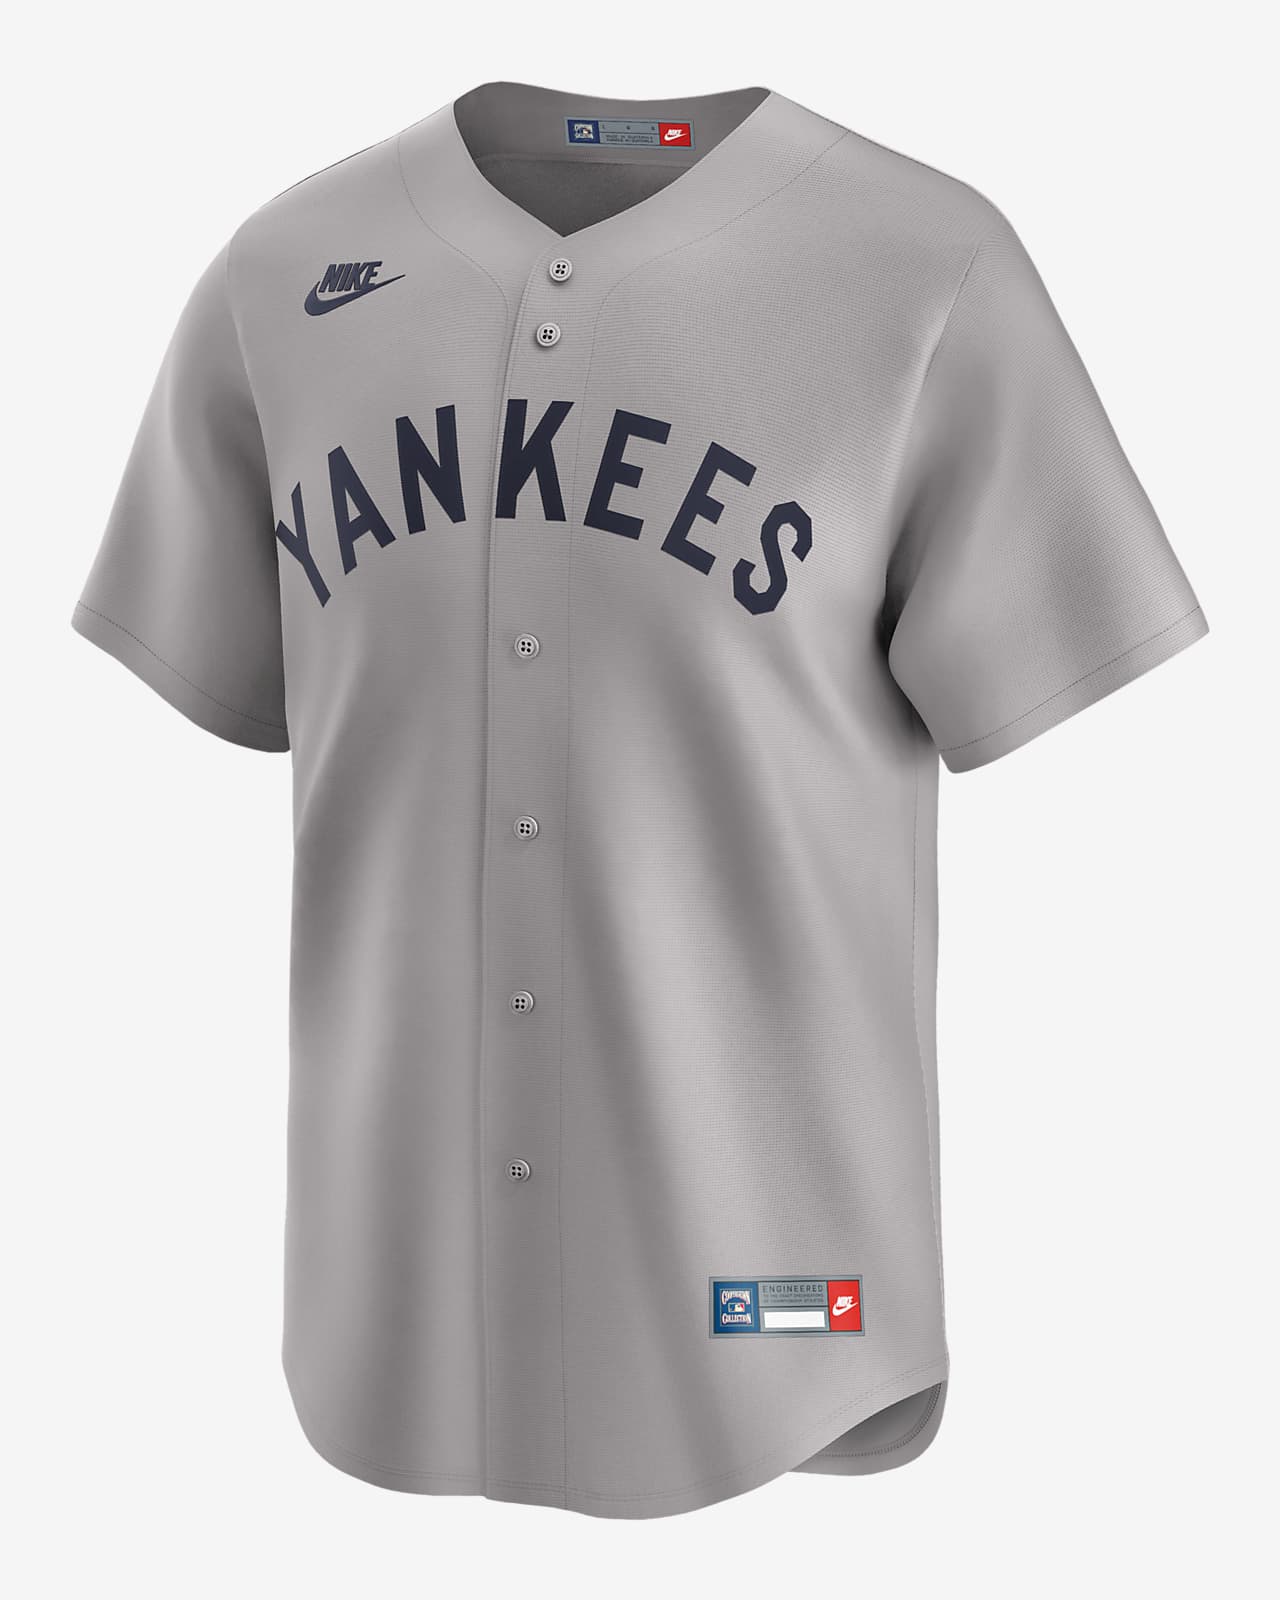 New York Yankees Cooperstown Men's Nike Dri-FIT ADV MLB Limited Jersey